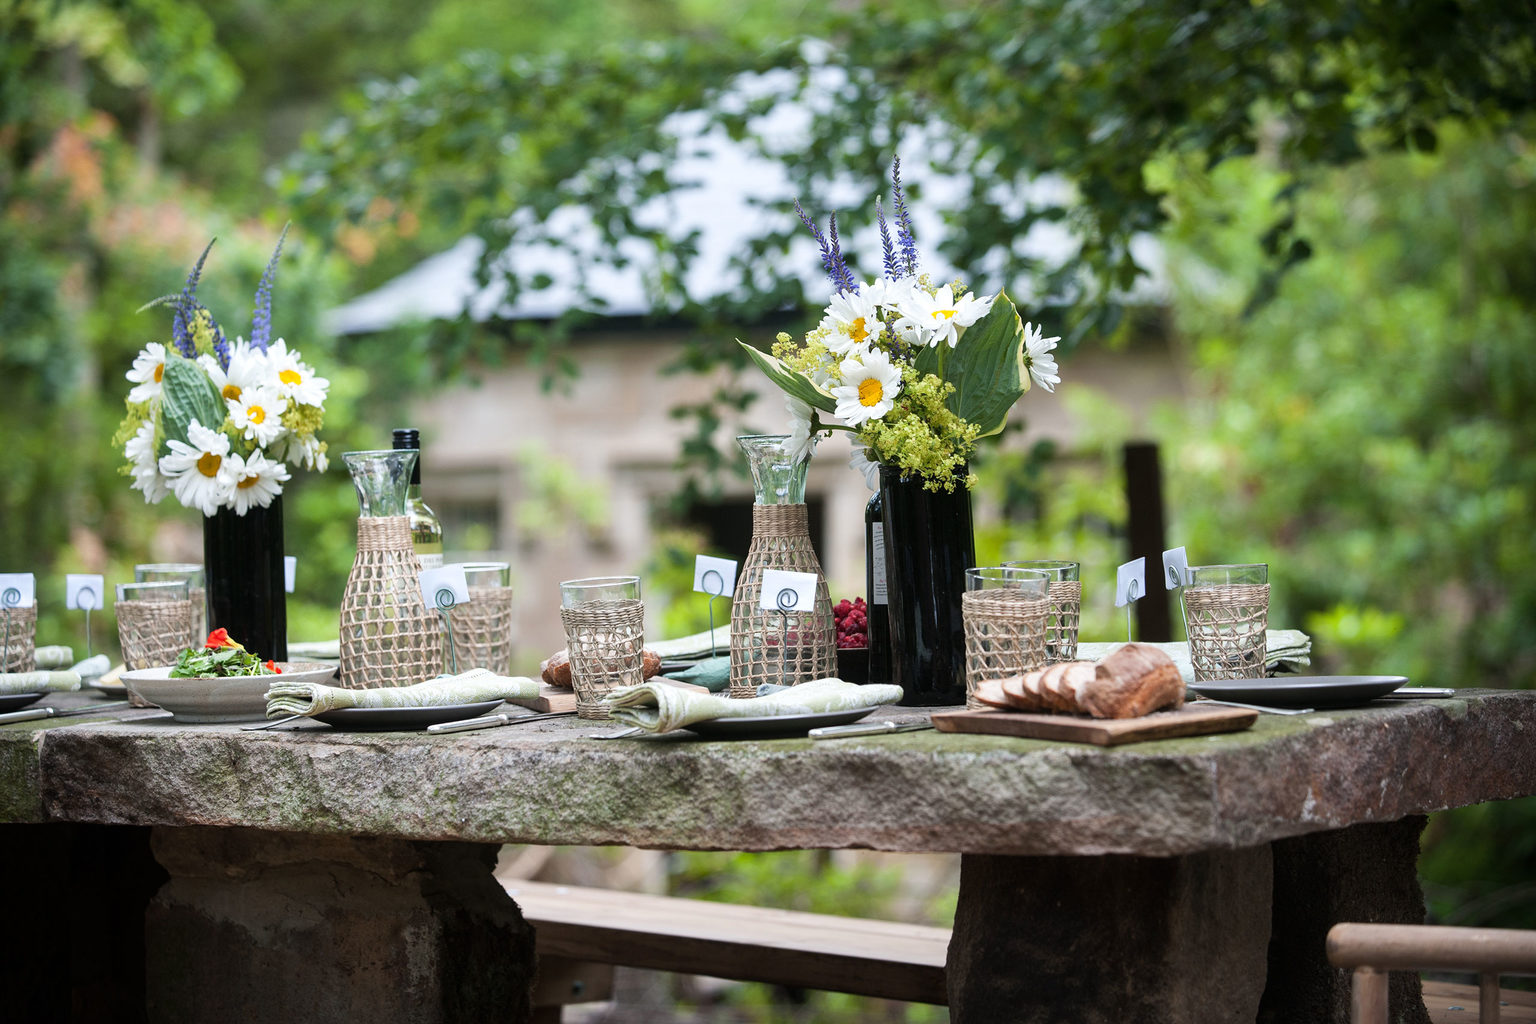 A table set up for an outdoor party at the Lake House private island on the Swinton Estate in North Yorkshire